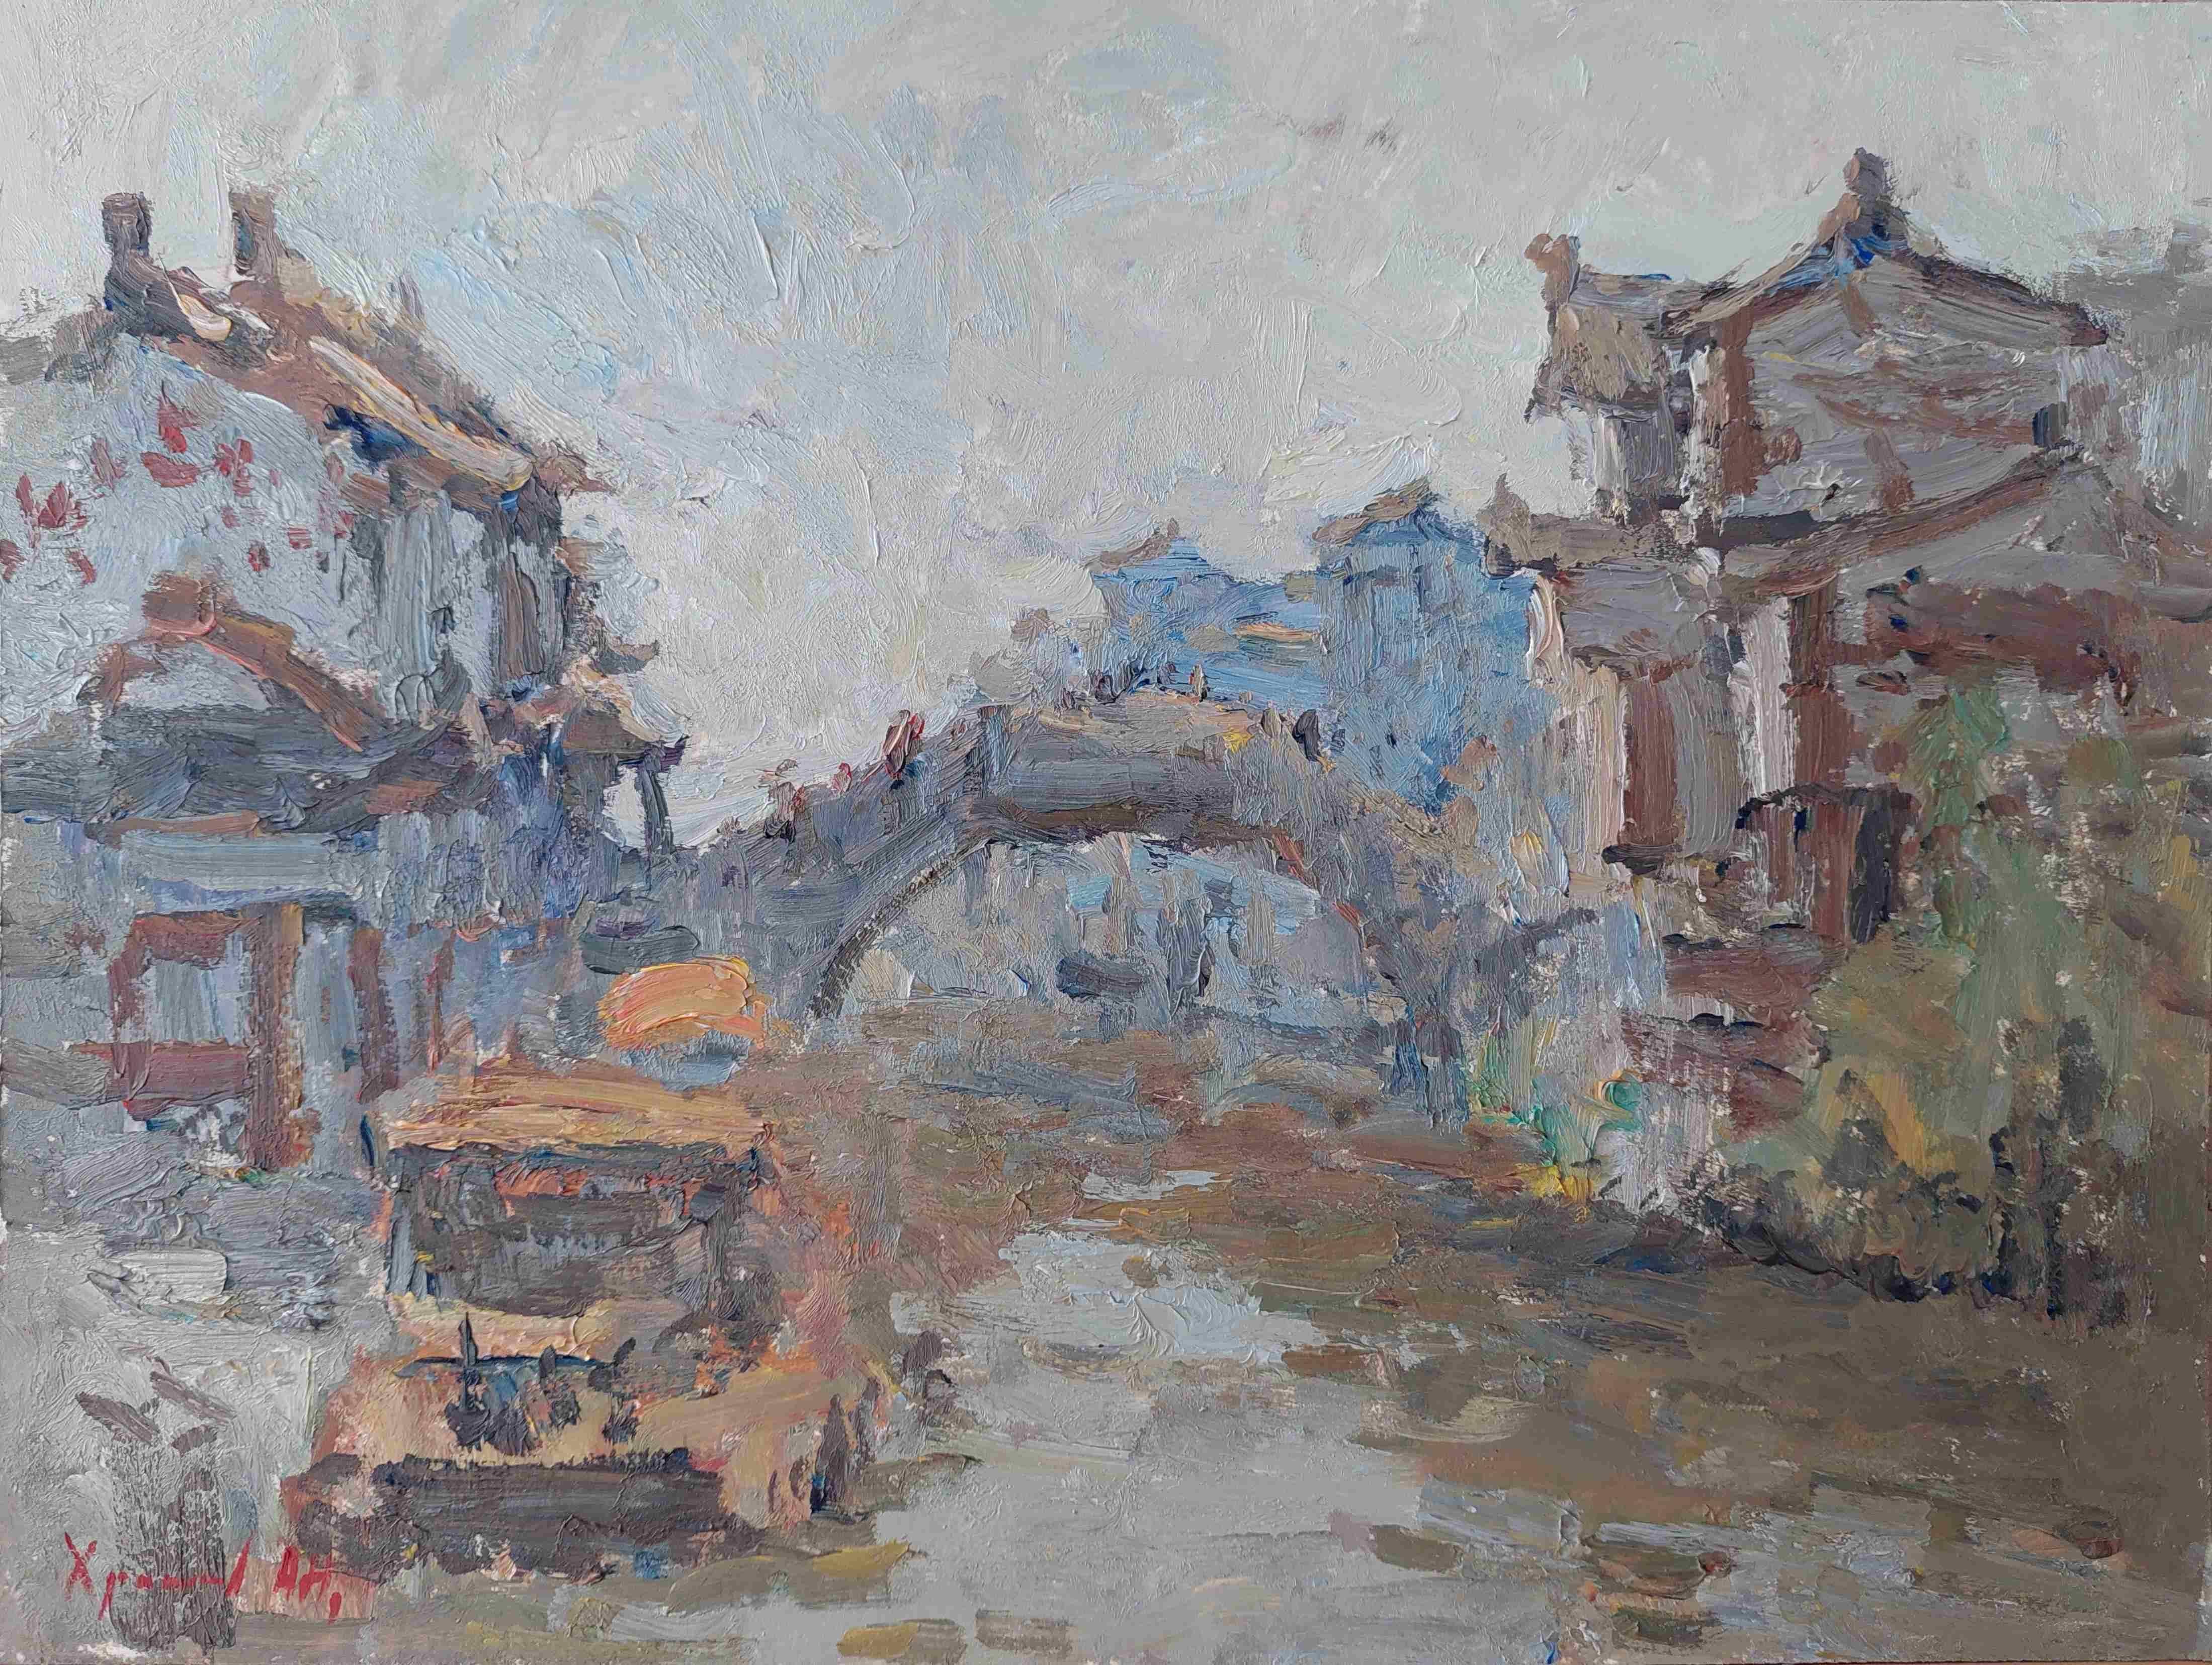  Oleksandr Khrapachov Landscape Painting - All channel. The old Town. Jiangsu Province.